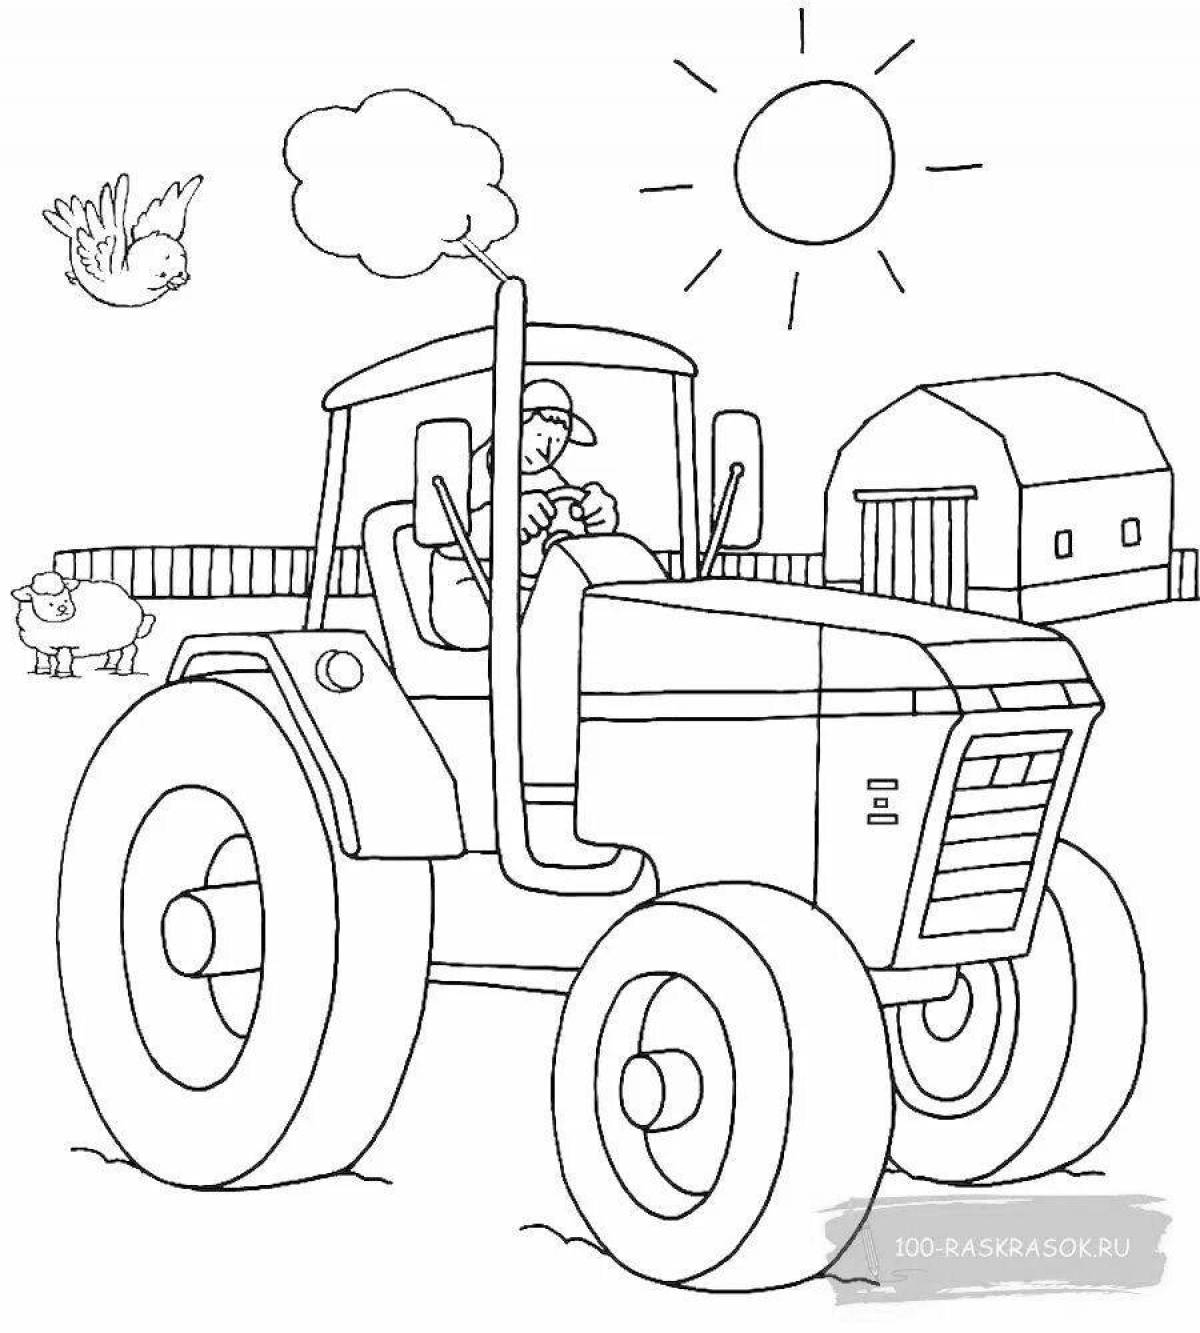 Bright blue tractor with sprinkler